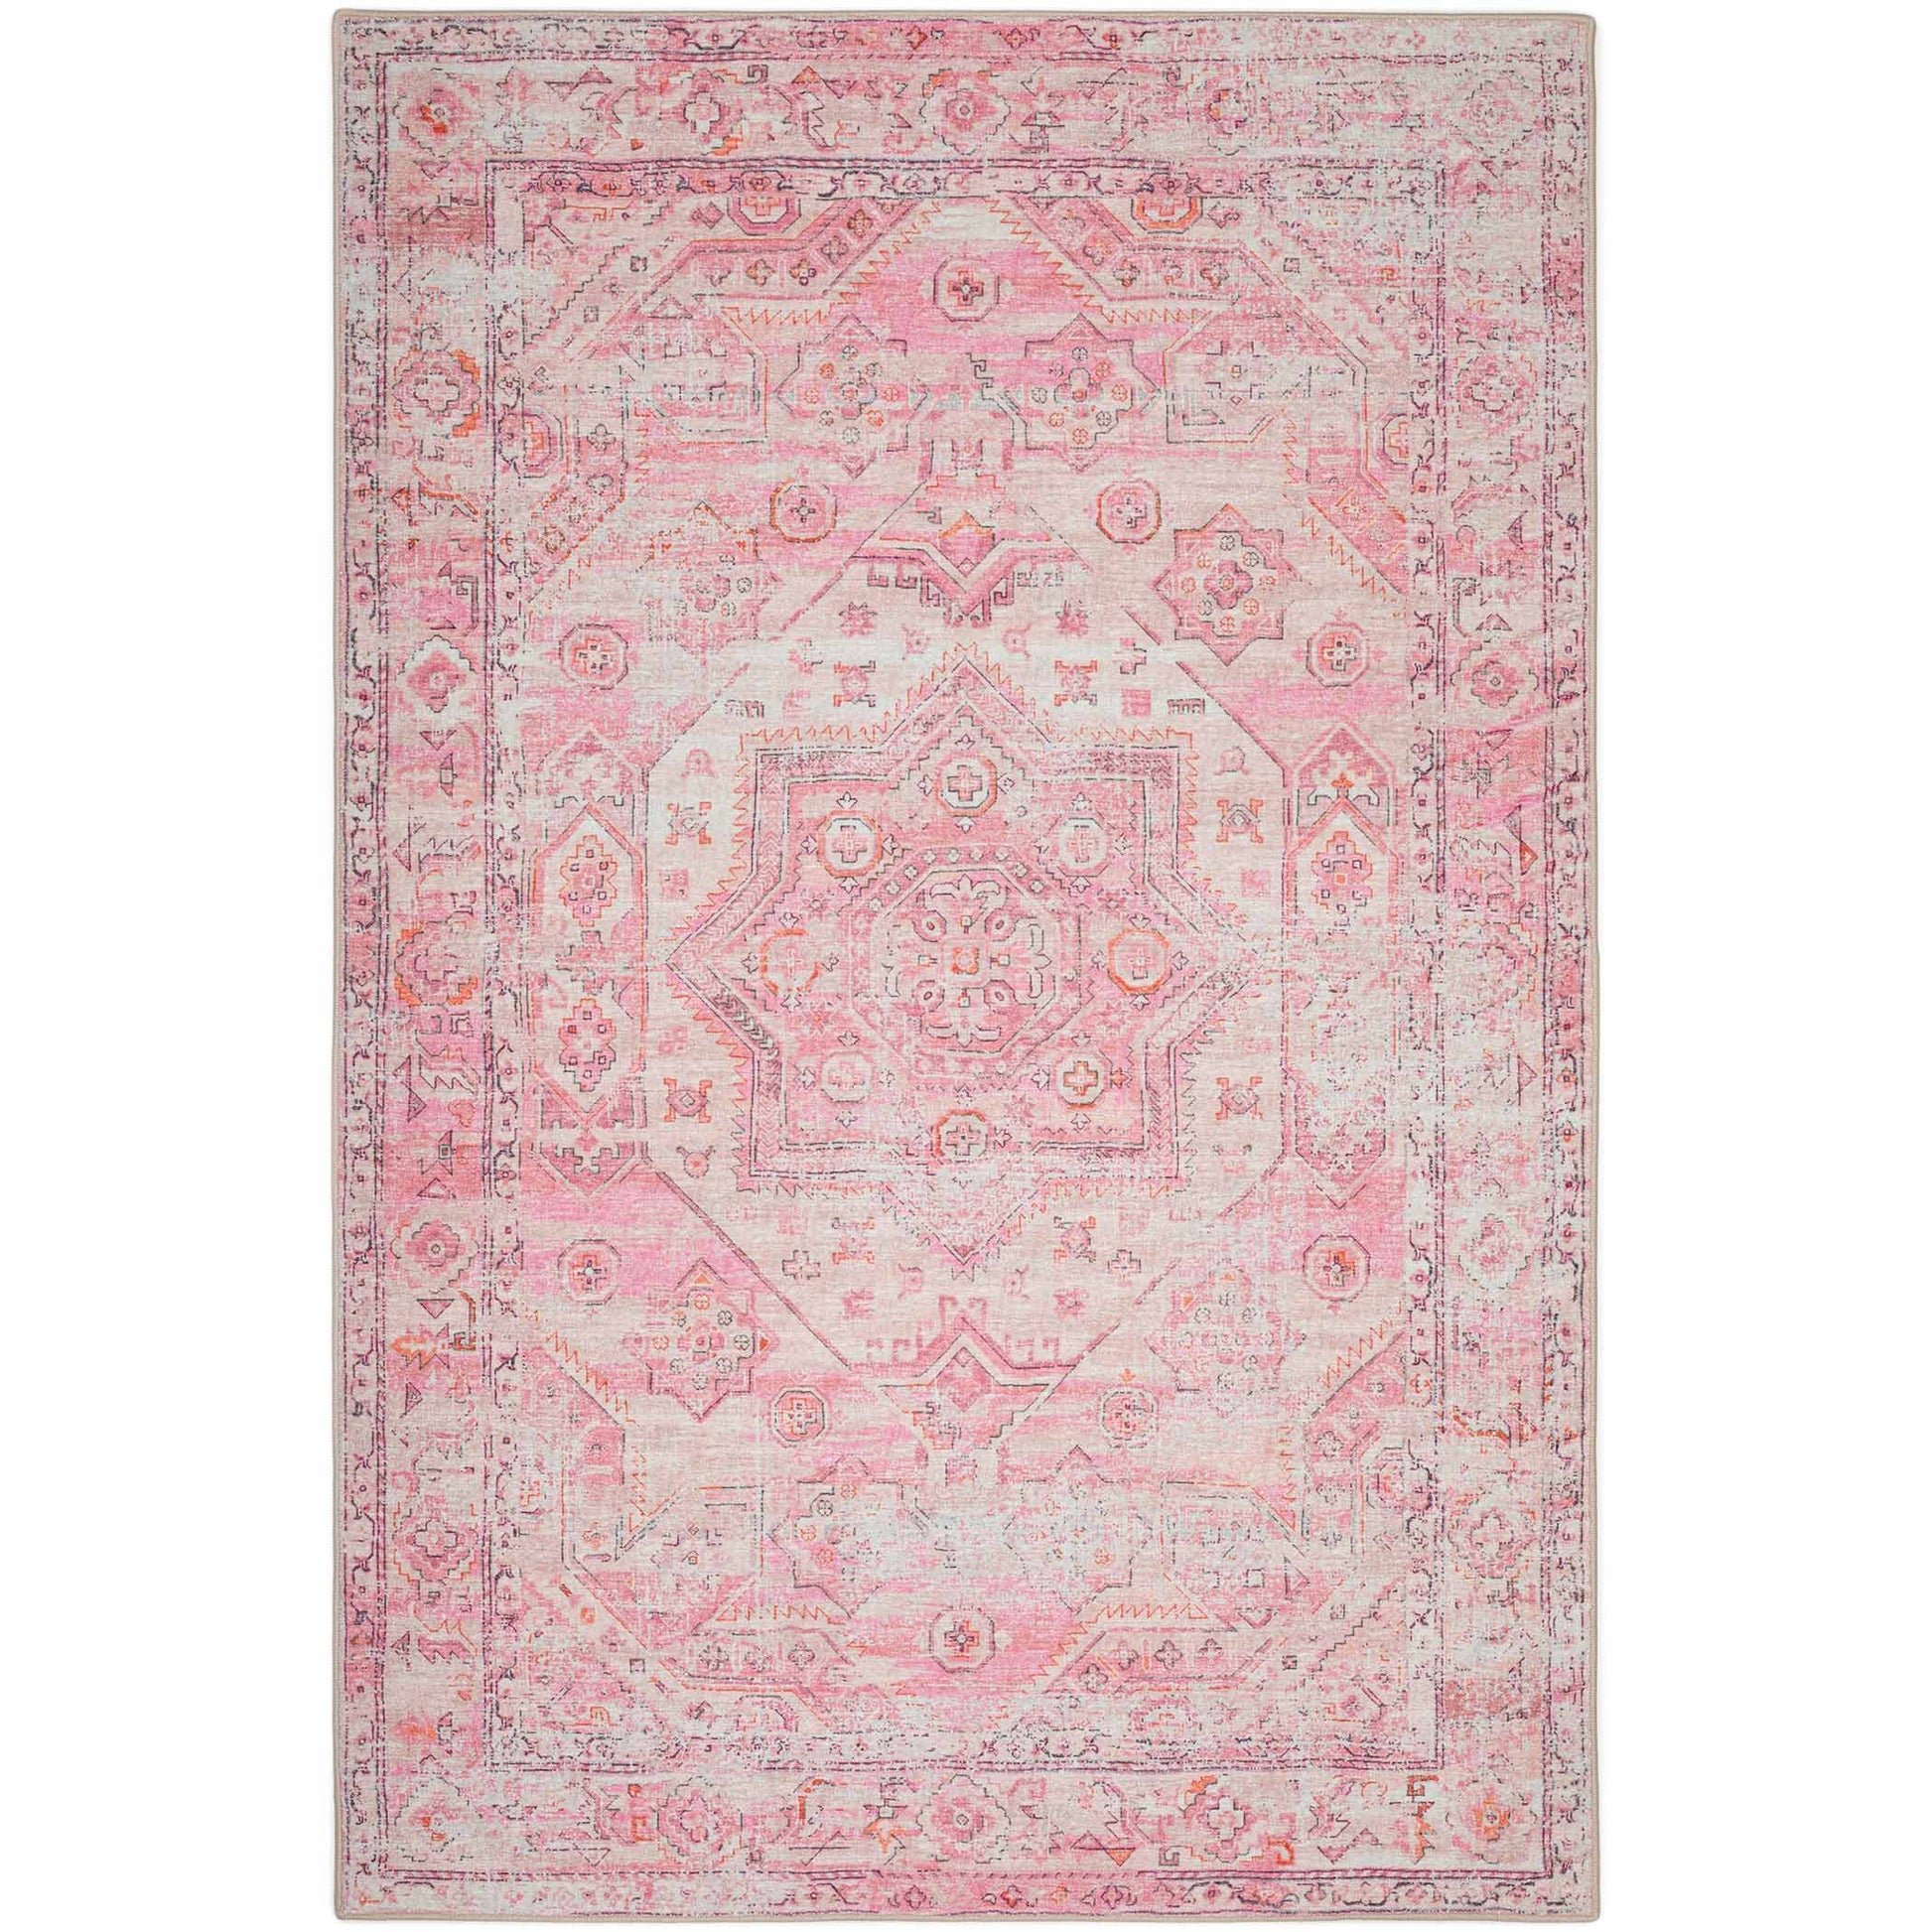 Dalyn Rugs Jericho JC5 Rose Transitional Tufted Rug